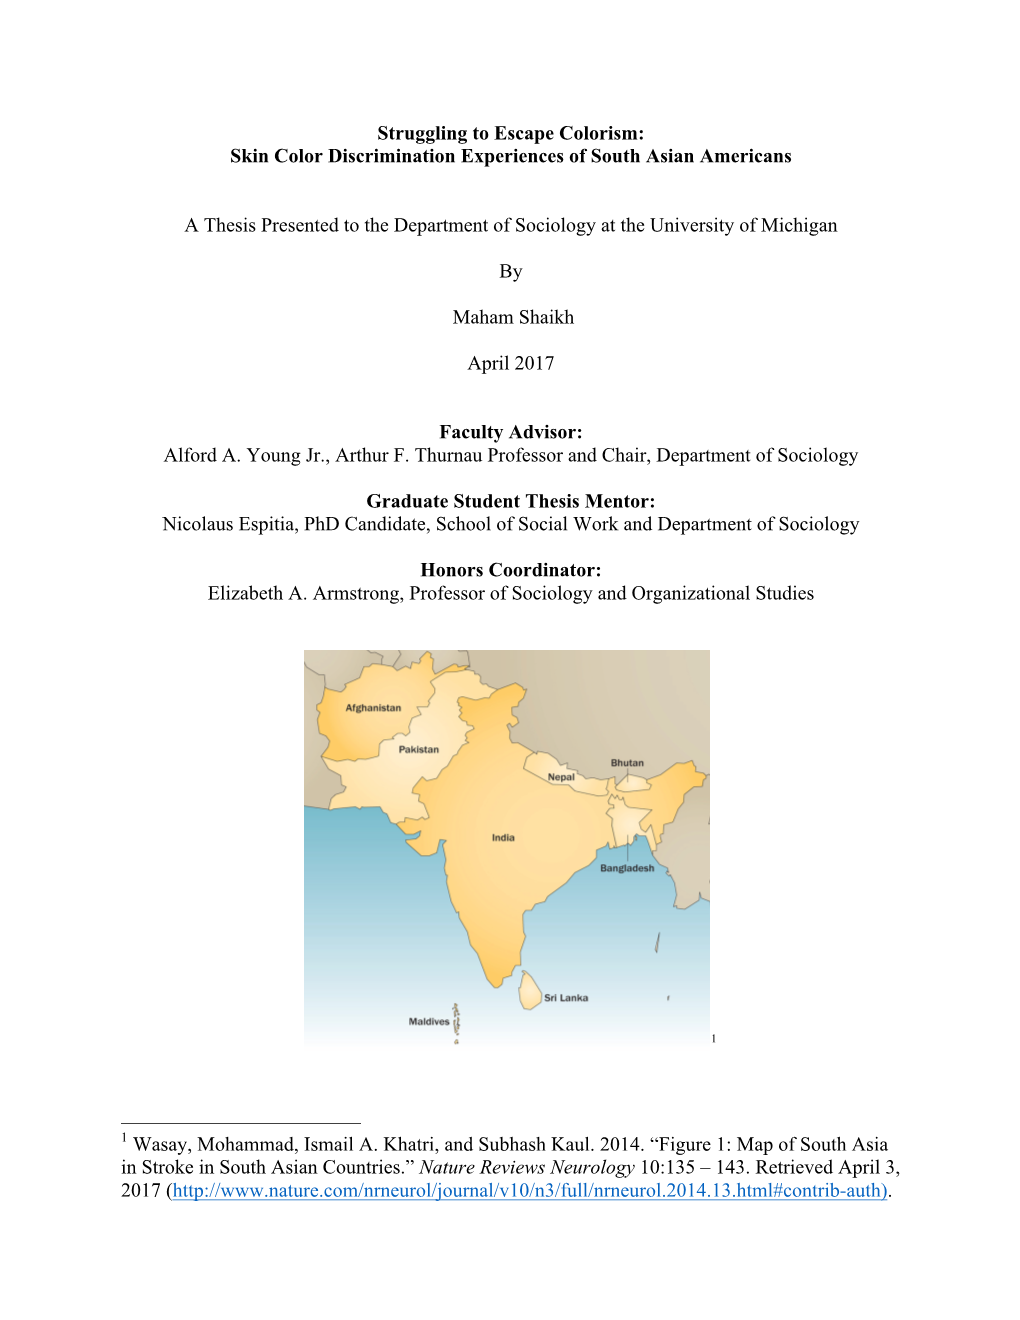 Skin Color Discrimination Experiences of South Asian Americans